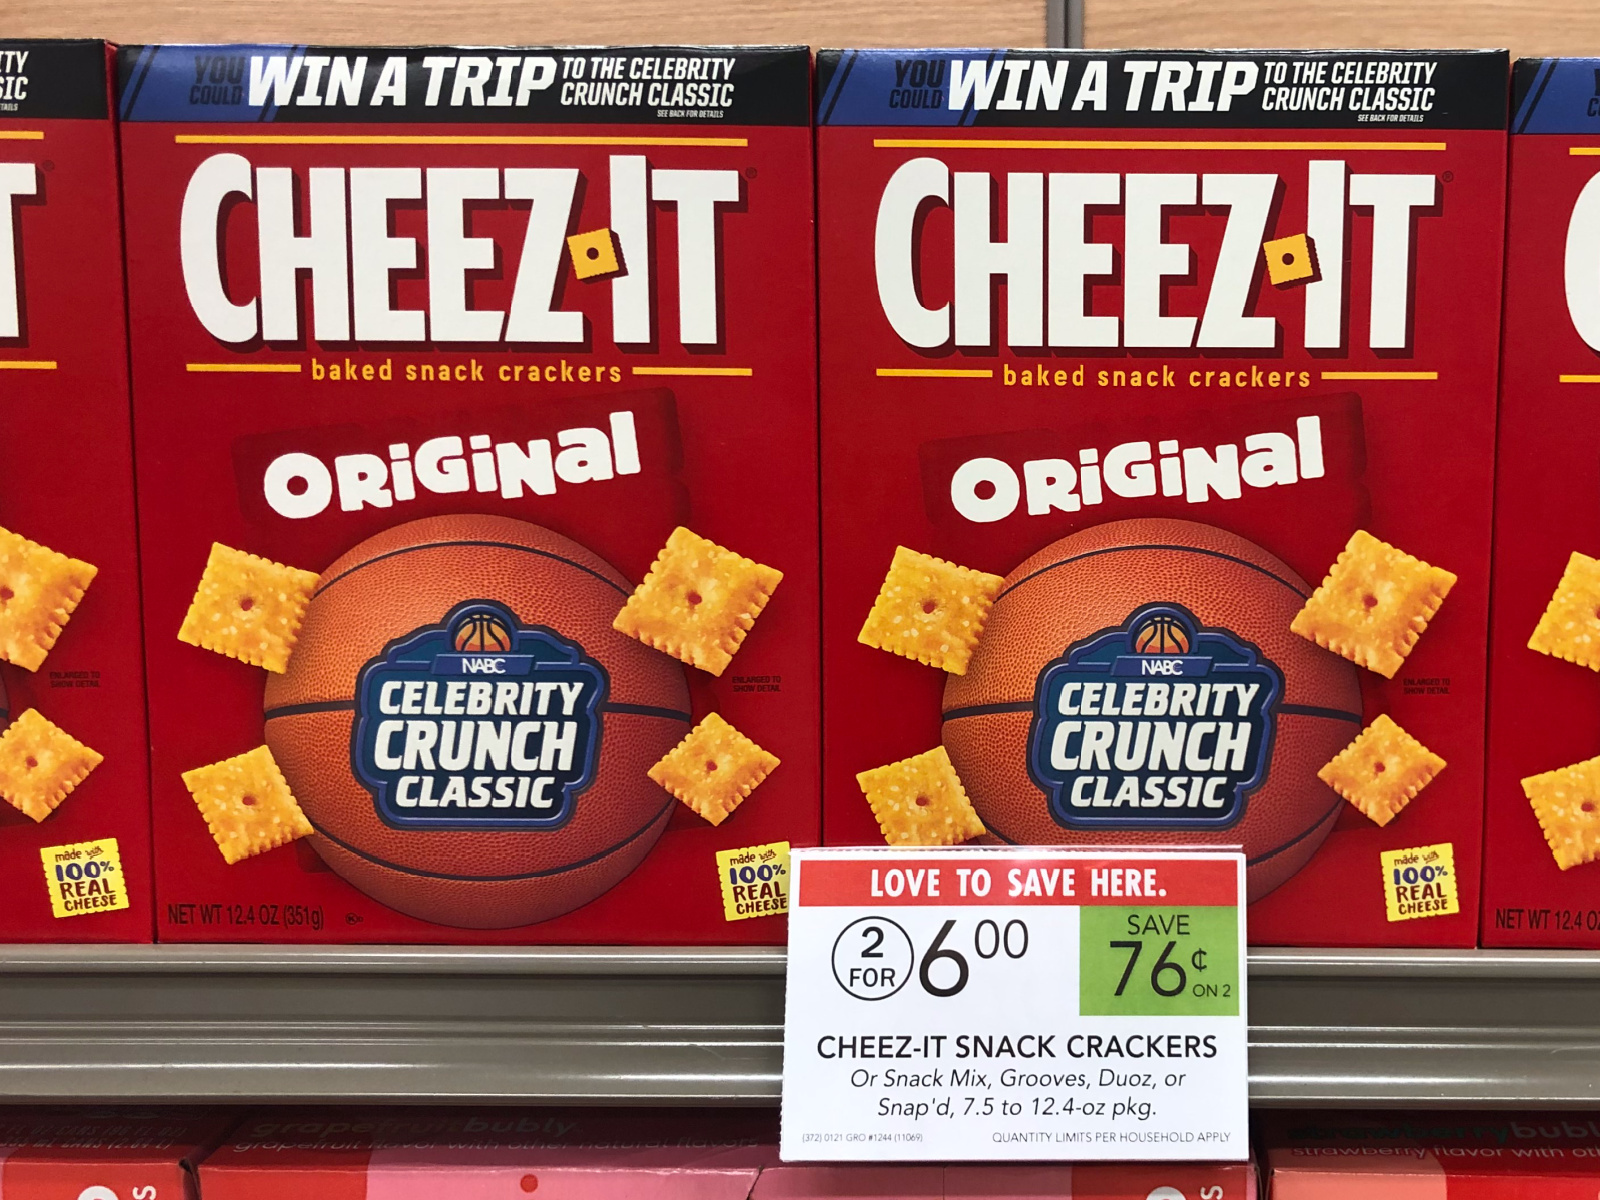 Get Ready For Game Day With A Great Deal On Cheez-It Snacks - On Sale 2/$6 At Publix! on I Heart Publix